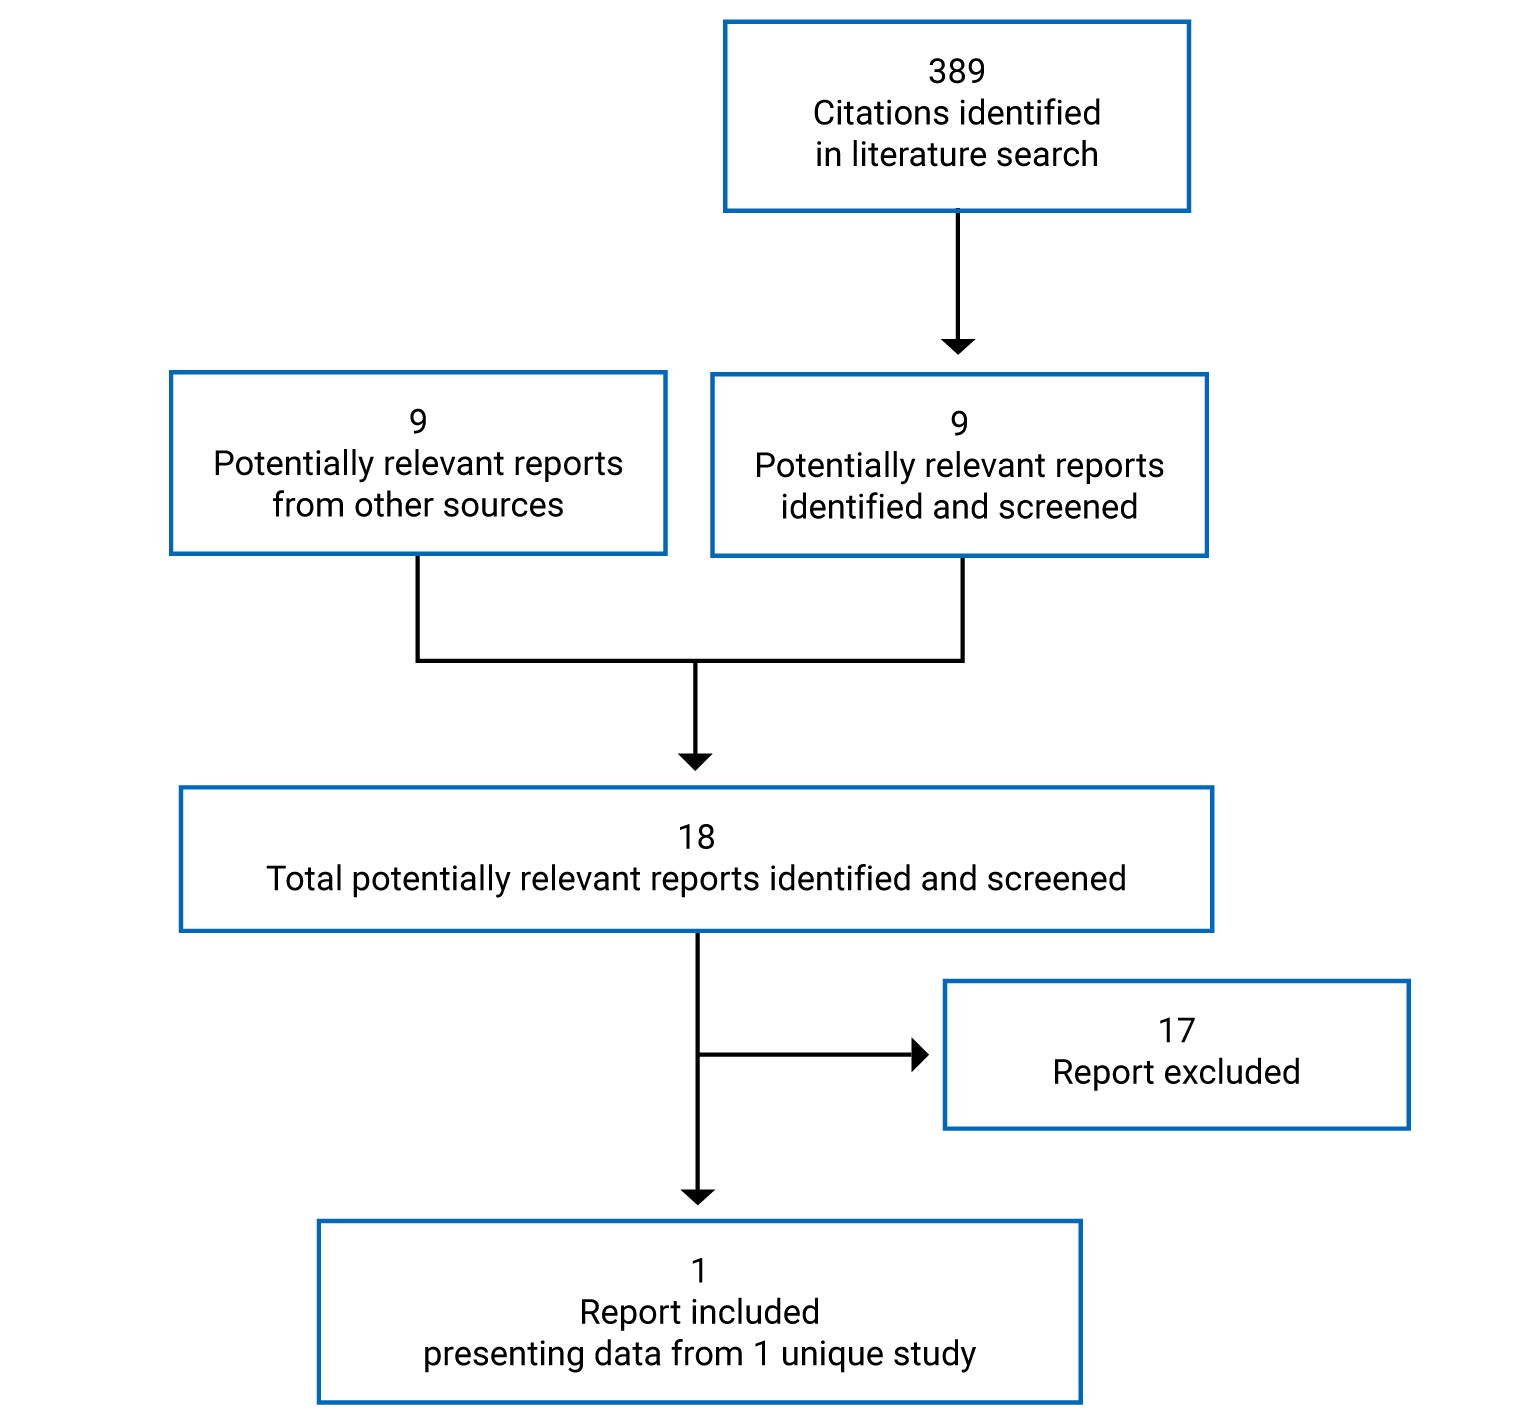 389 citations were identified, 380 were excluded, and 9 electronic literature and 9 grey literature potentially relevant full-text reports were retrieved for scrutiny. In total, 1 unique study is included in the review.